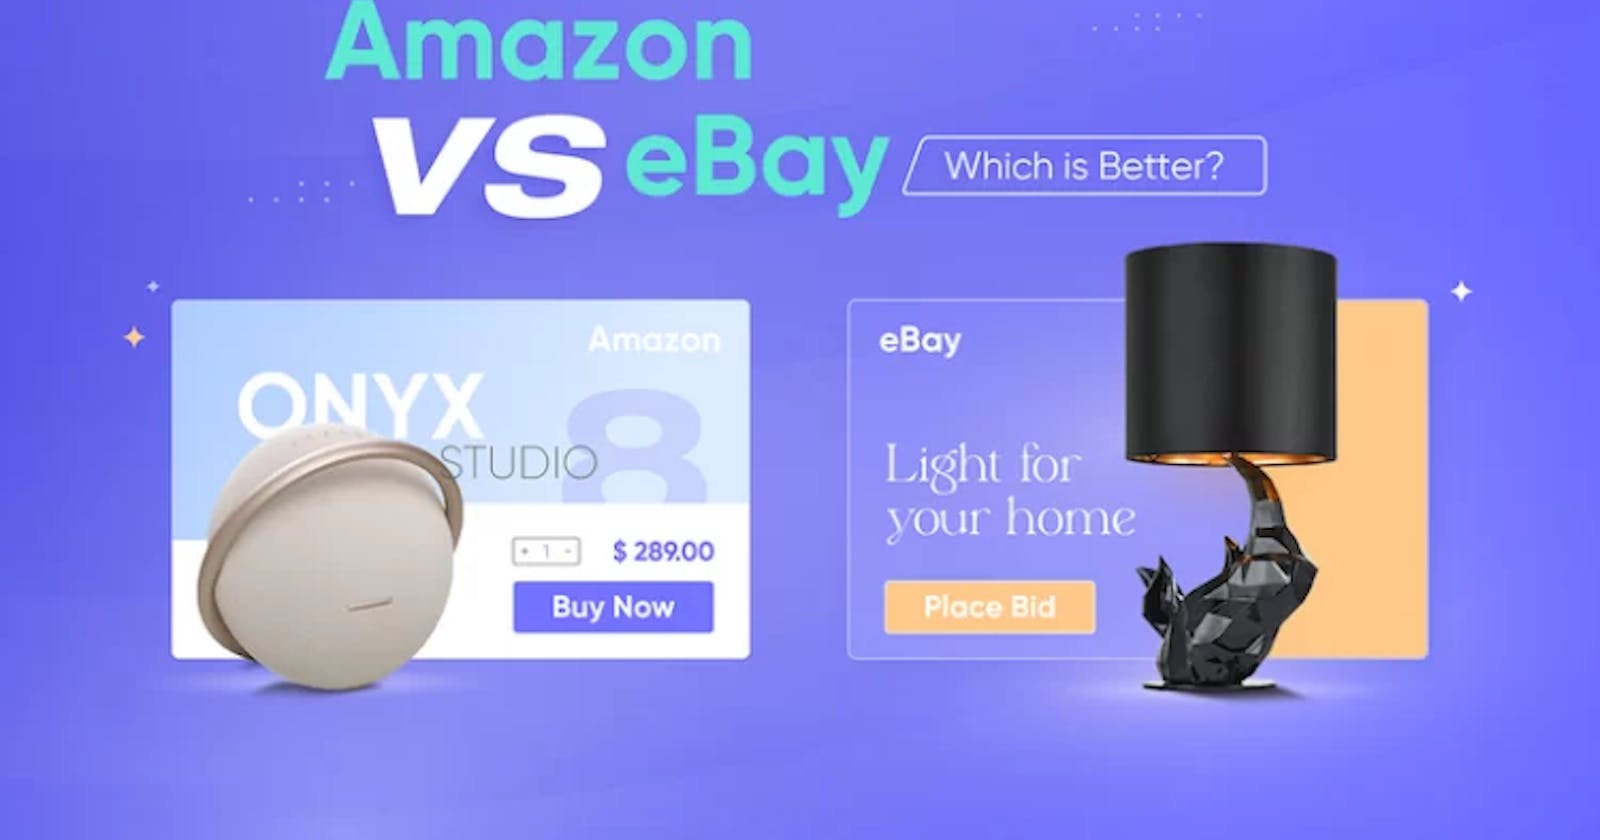 Which is Better: Amazon or eBay?